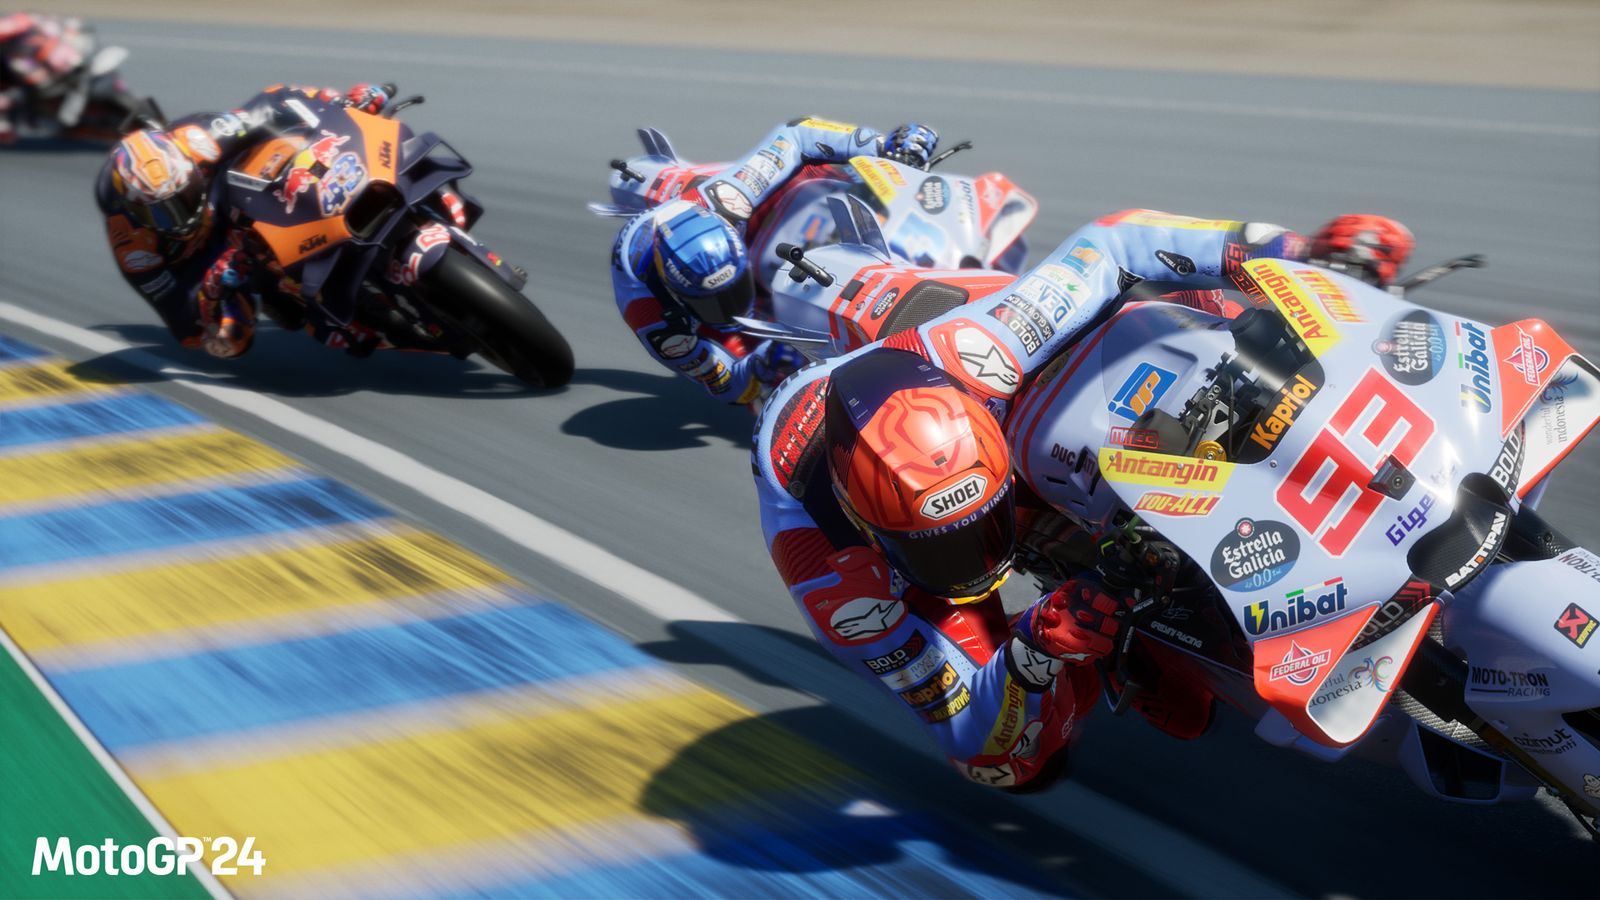 MotoGP 24 revealed with new Riders Market and Stewards